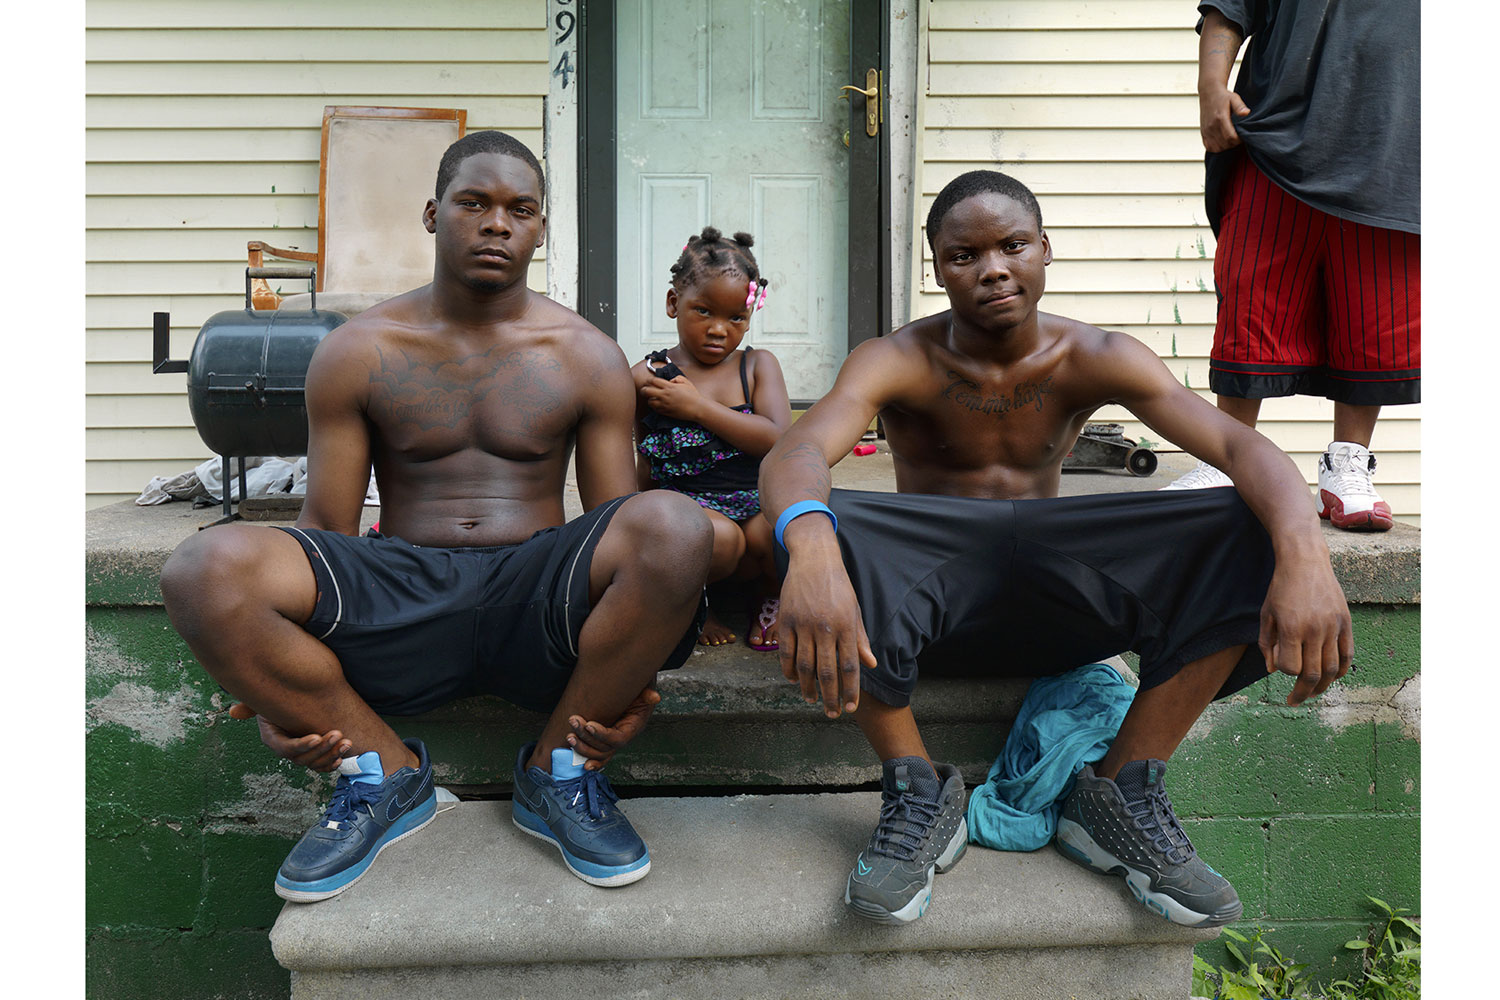 Marcus and Bey-Bey, Eastside, Detroit, 2012
                              
                              Two brothers with tattoos on their chests memorializing the death of their mother who died from an asthma attack at the age of 34.